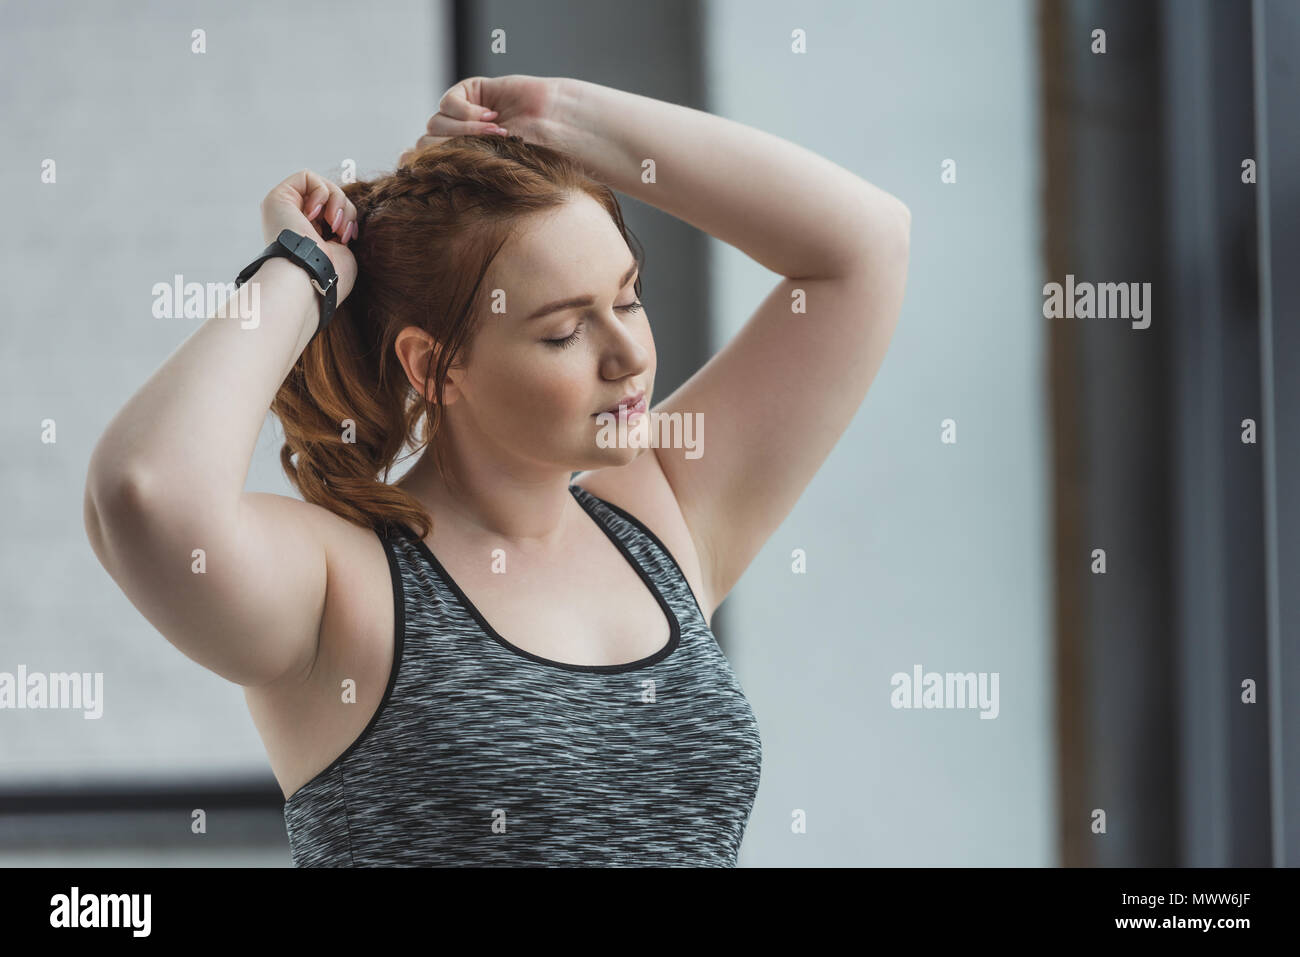 Obese girl fixing her hair in gym Stock Photo